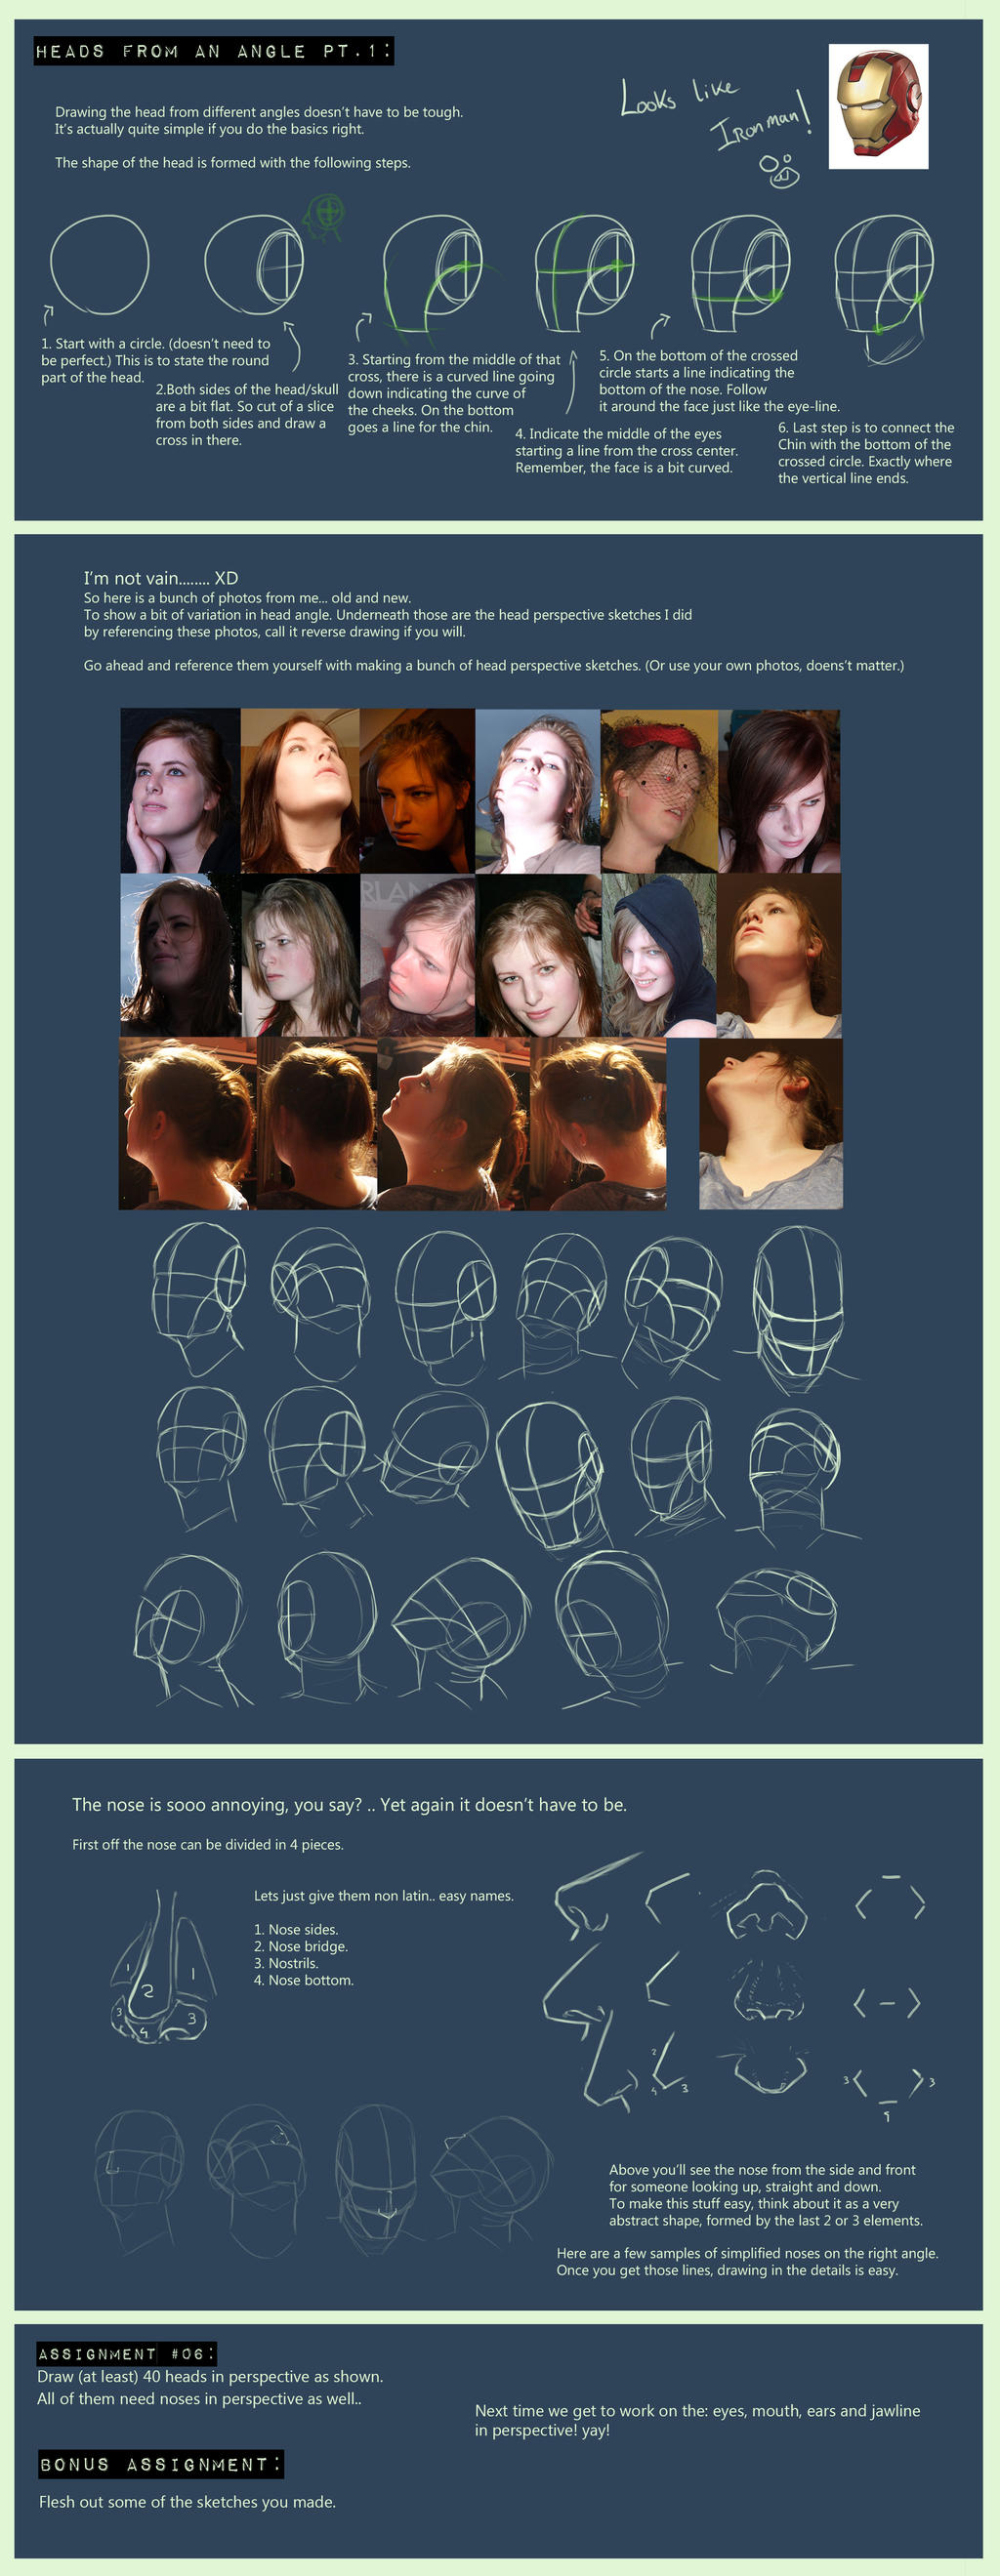 head_s_from_an_angle_pt_1_tutorial__by_suzanne_helmigh-d65m199.jpg